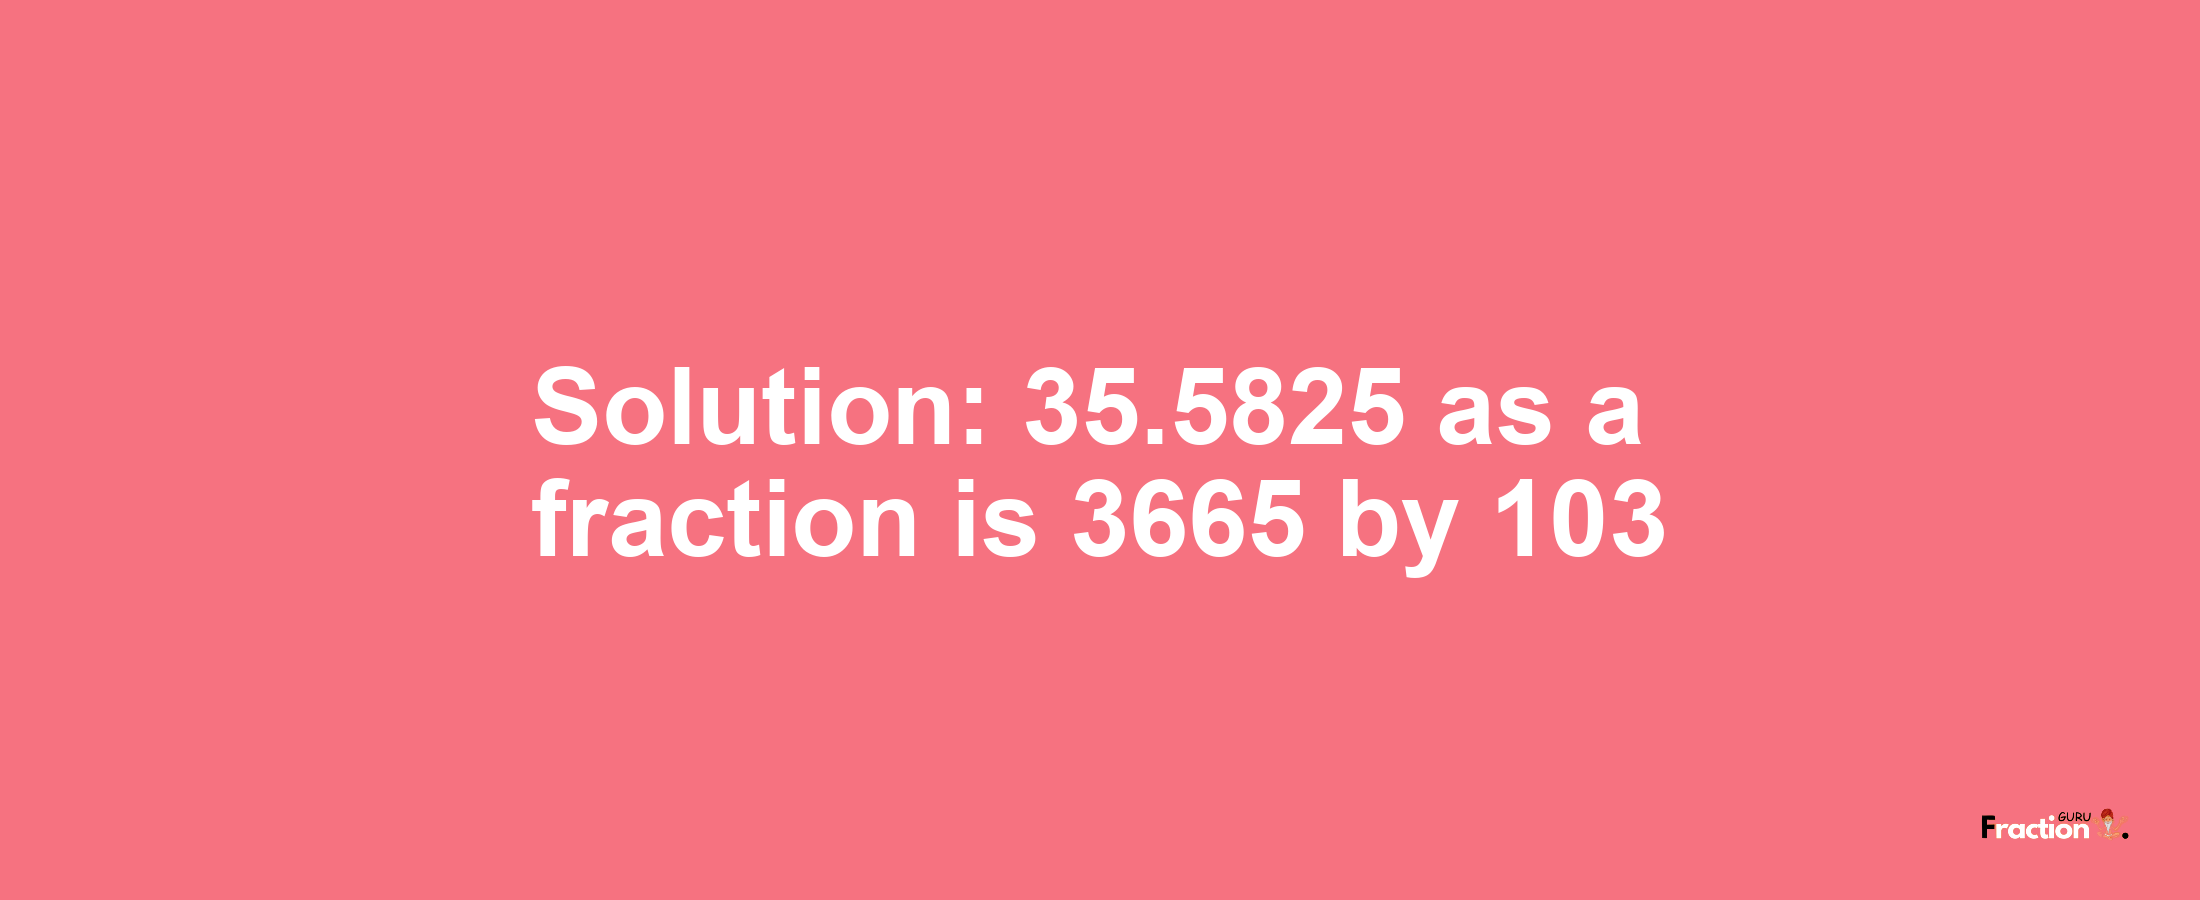 Solution:35.5825 as a fraction is 3665/103